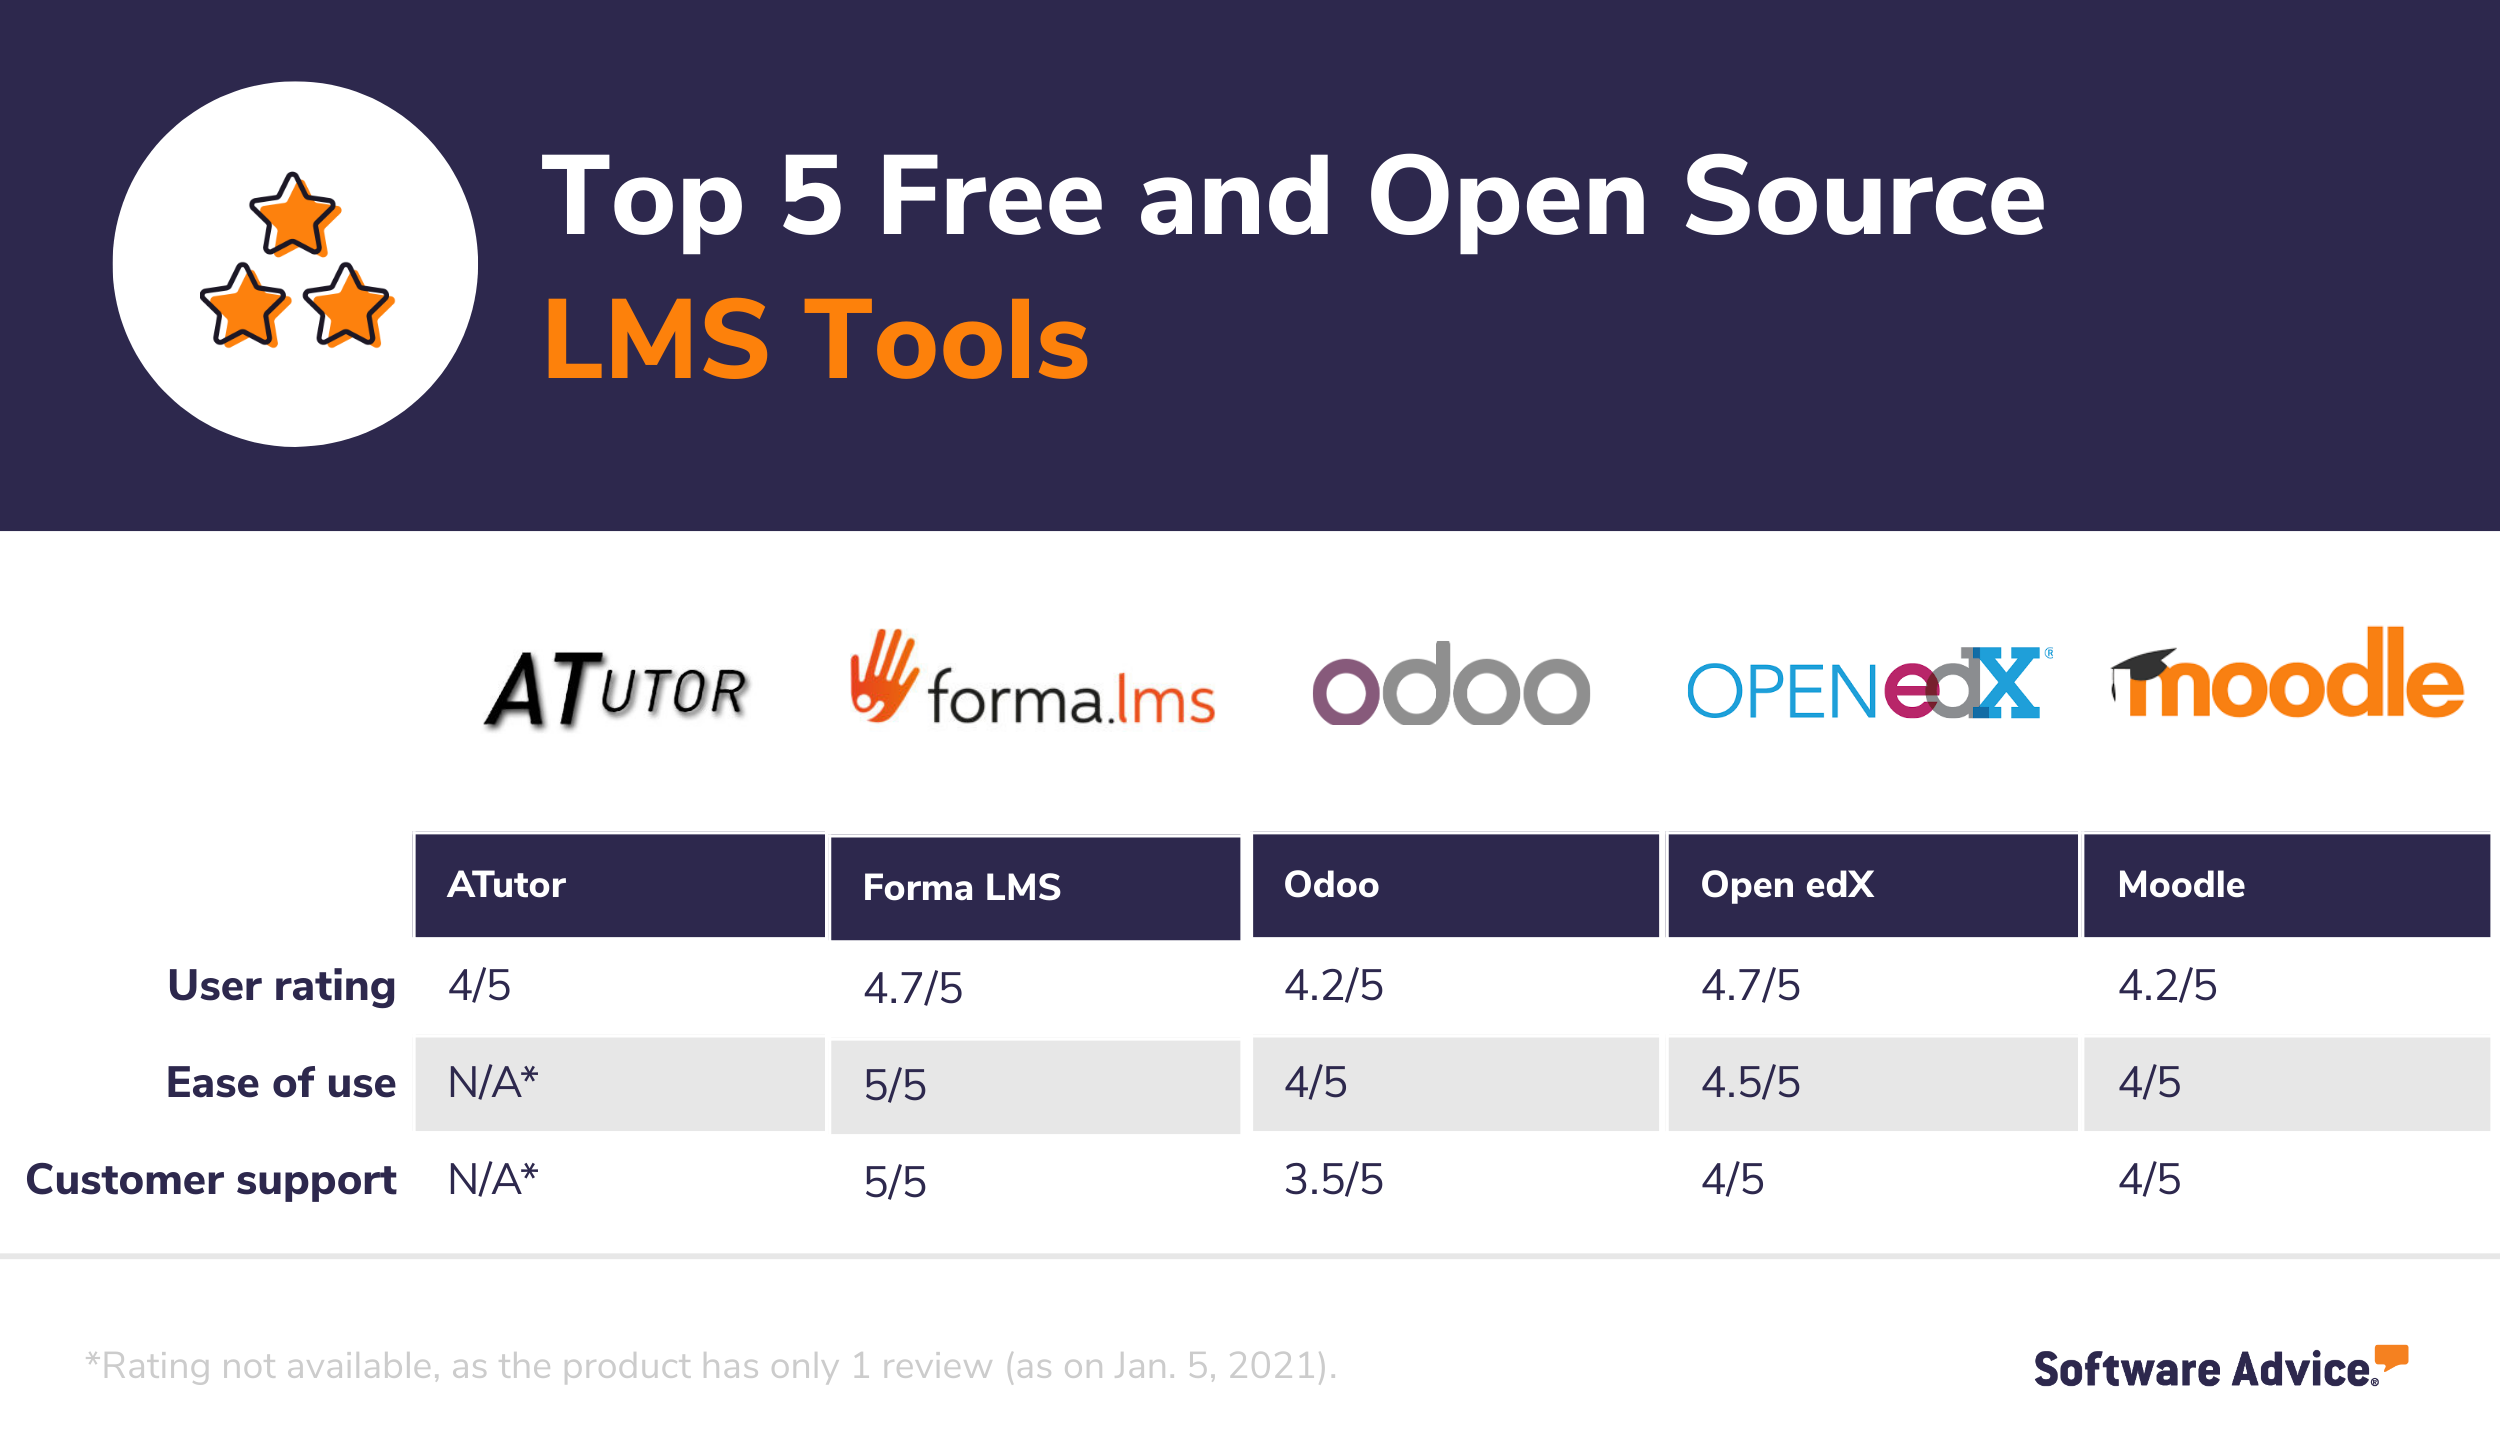 Top-5-free-and-open-source-LMS-tools